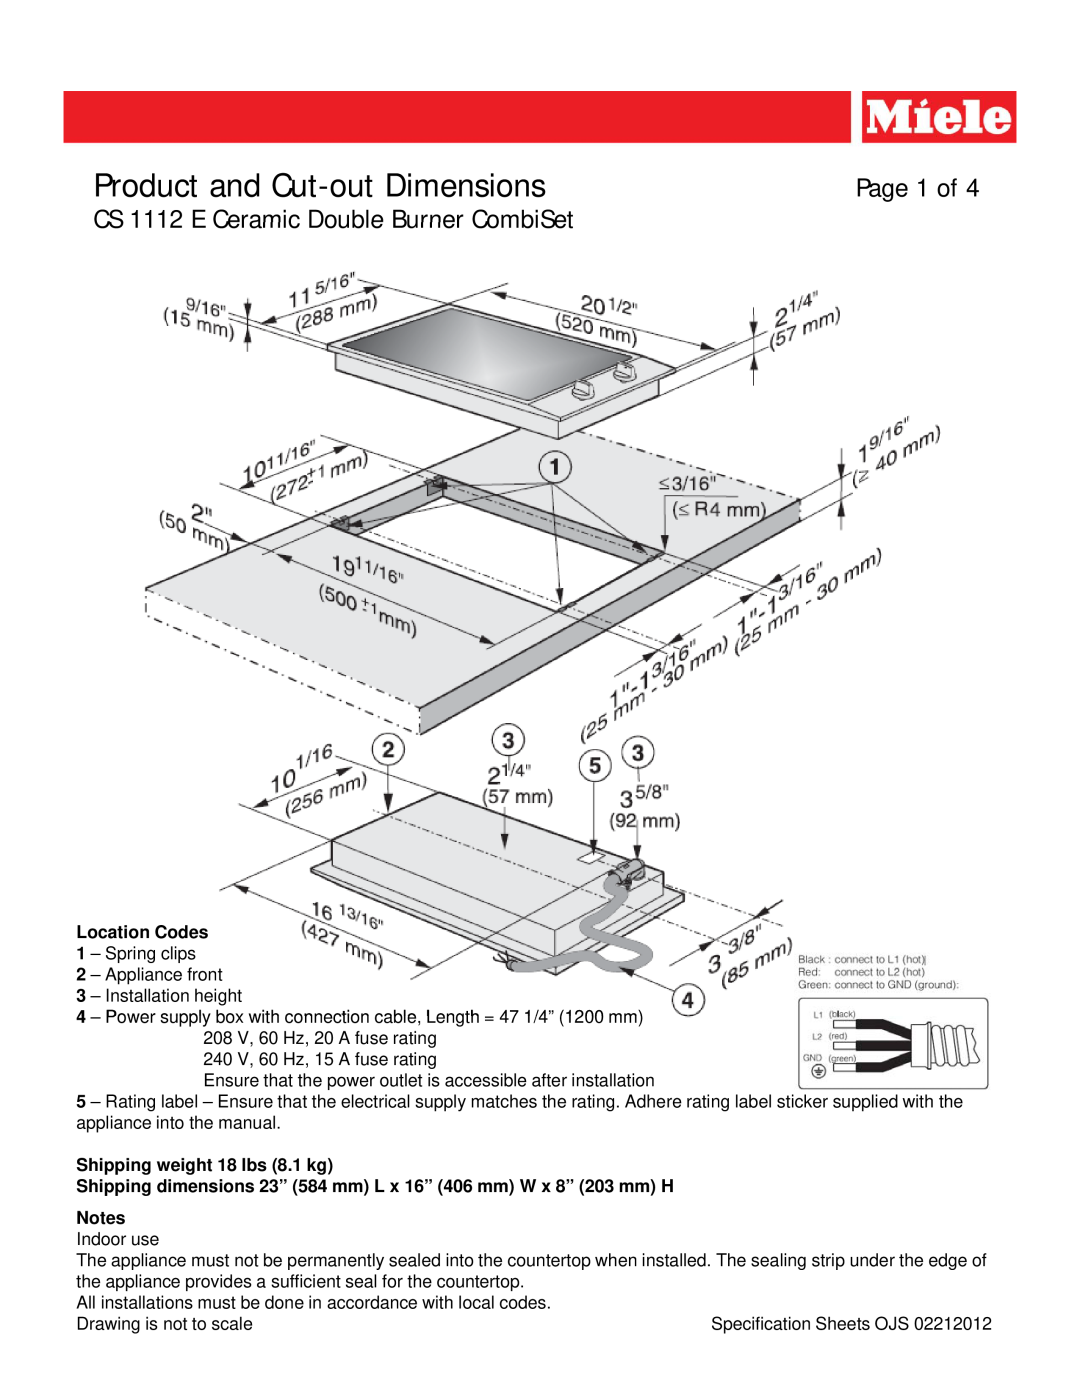 Miele dimensions Product and Cut-out Dimensions, Page 1 of, CS 1112 E Ceramic Double Burner CombiSet, Notes Indoor use 